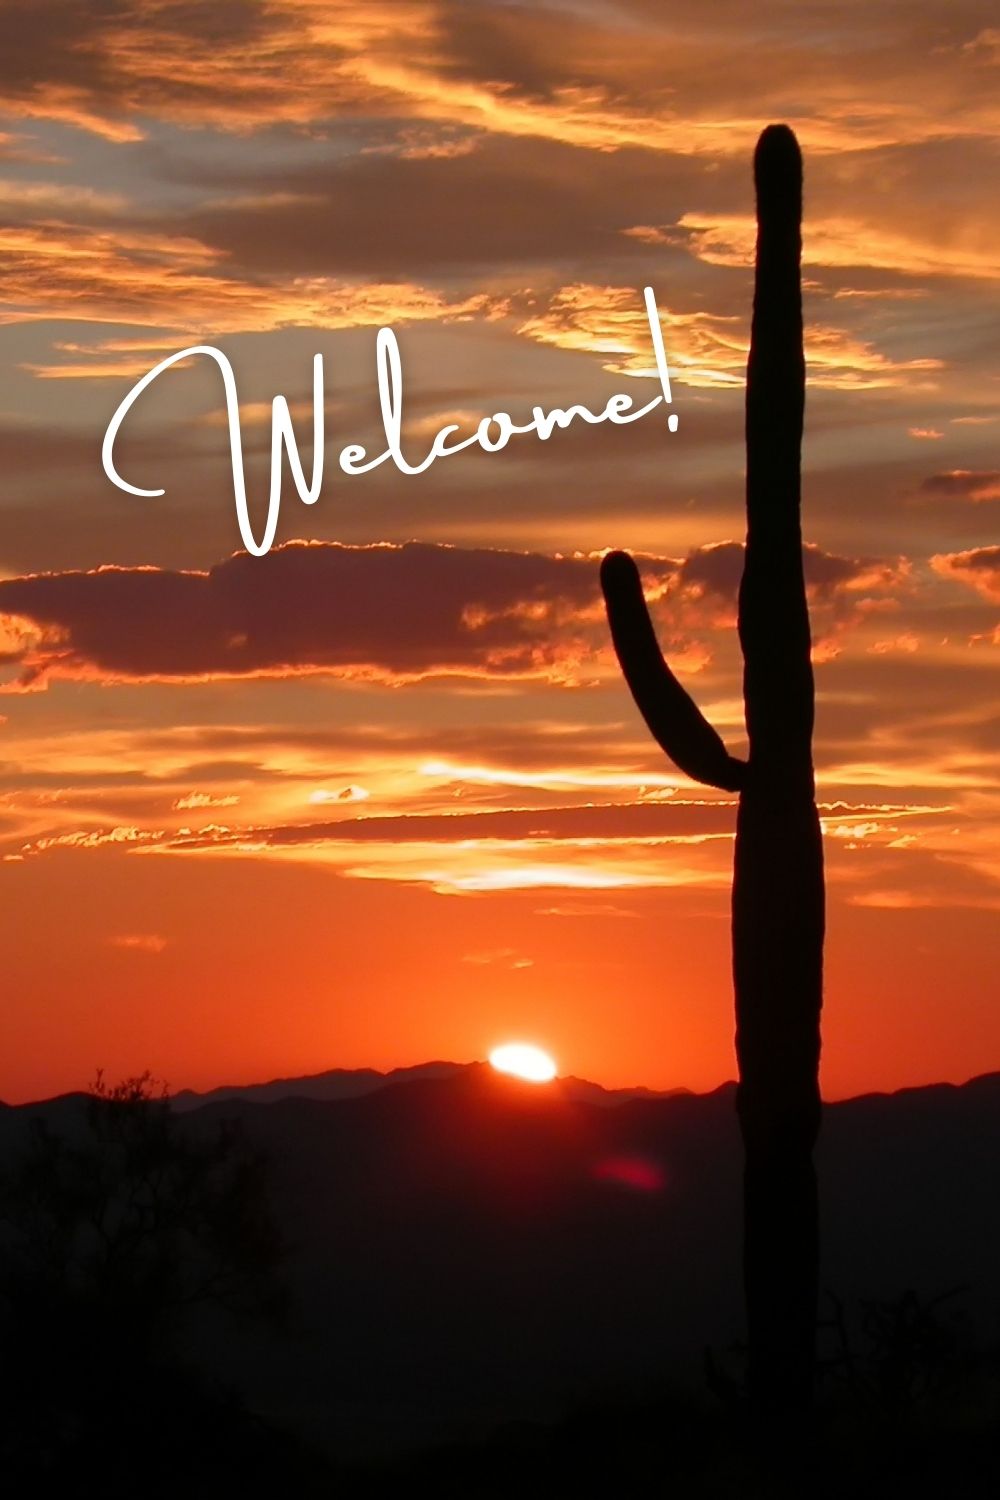 Desert sunset image with Welcome! written across the top.